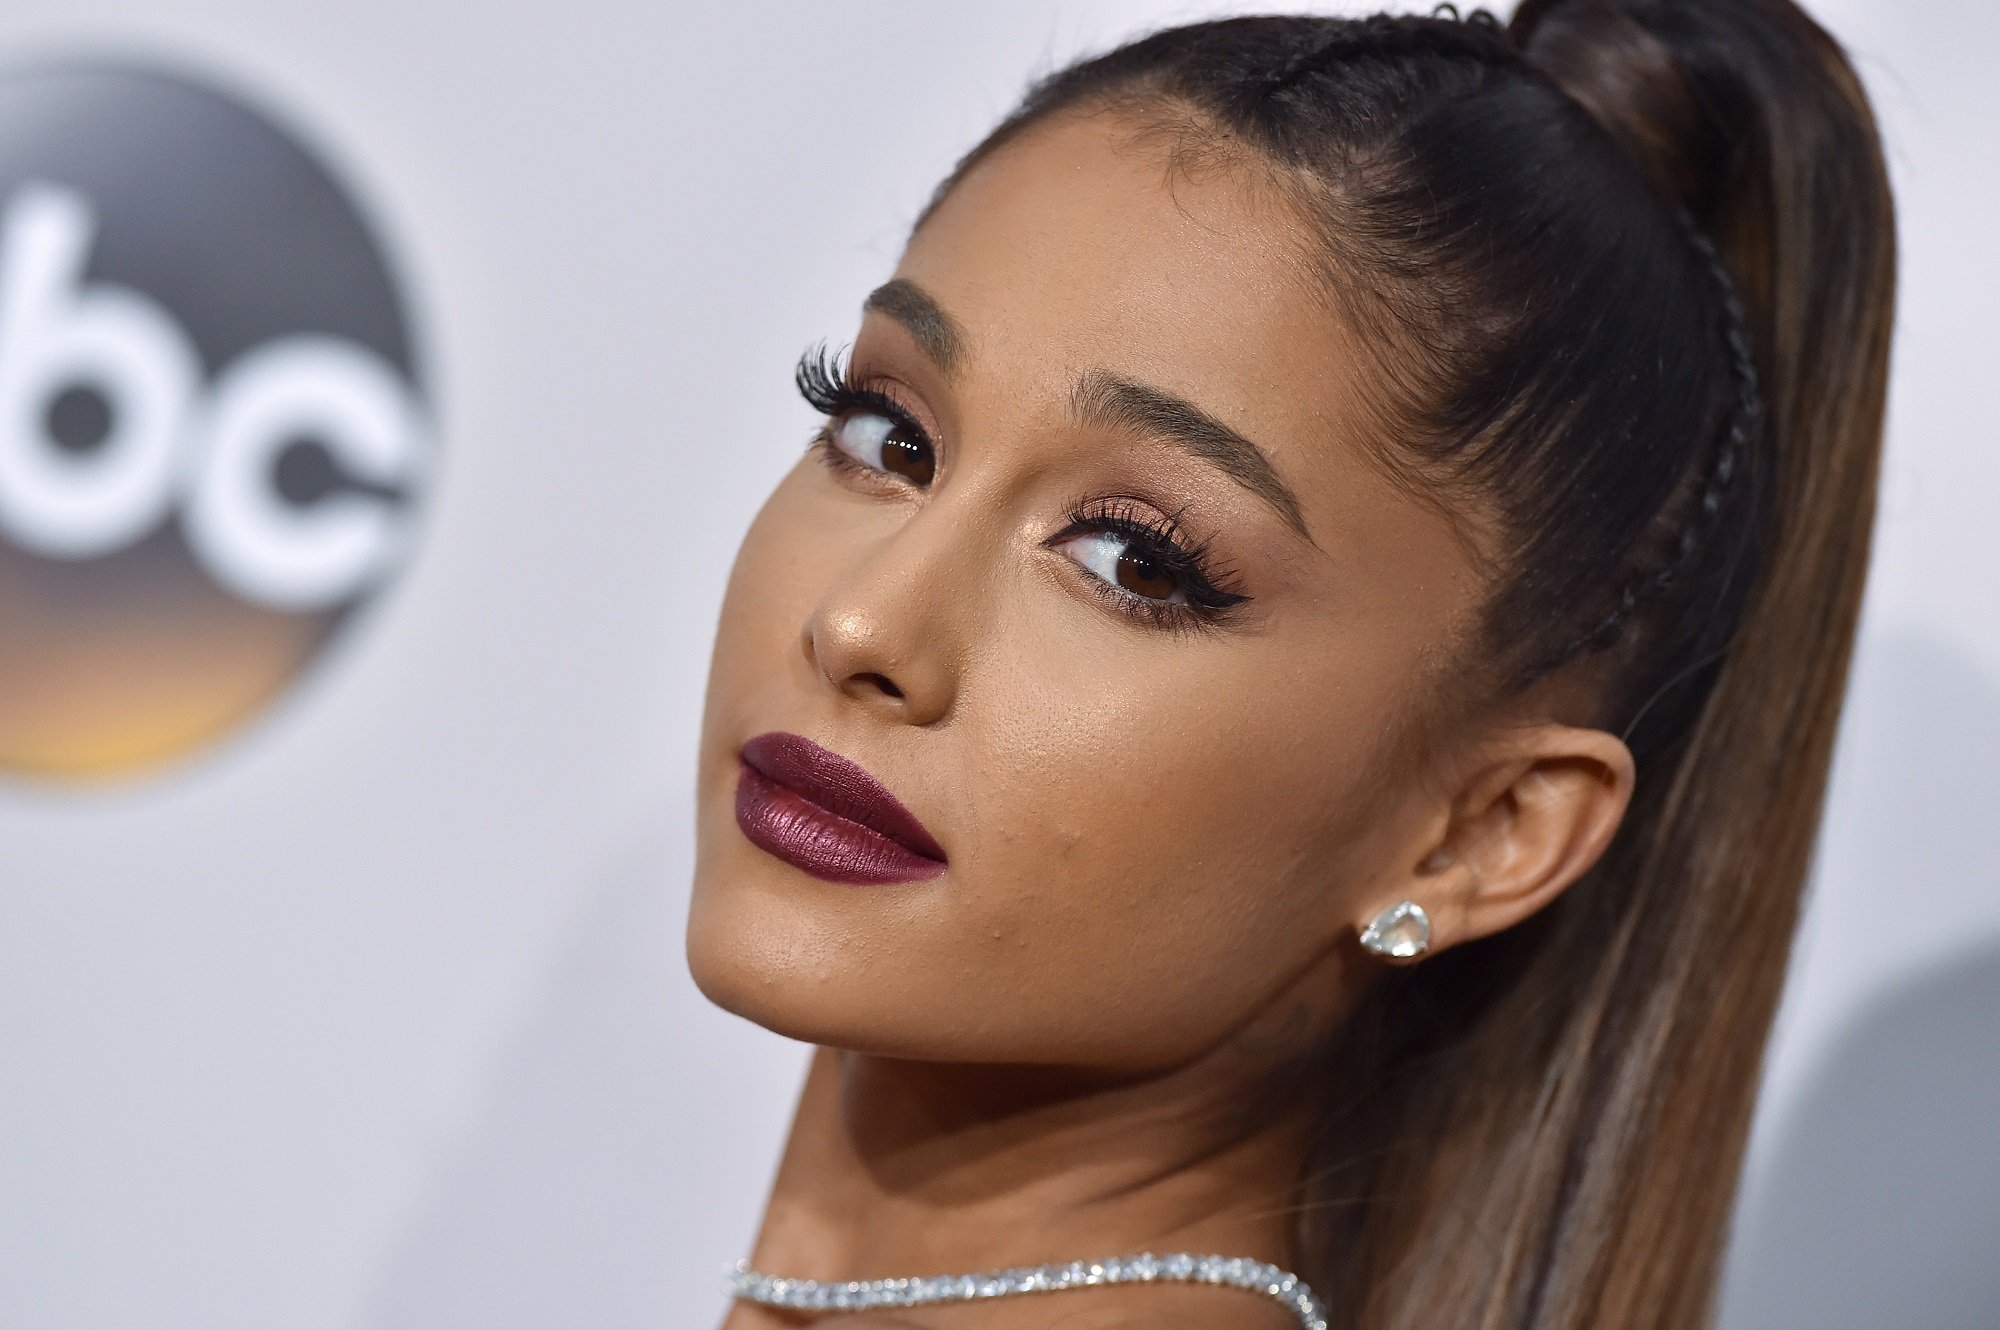 Ariana Grande arrives at the 2016 American Music Awards on November 20, 2016 in Los Angeles, California.